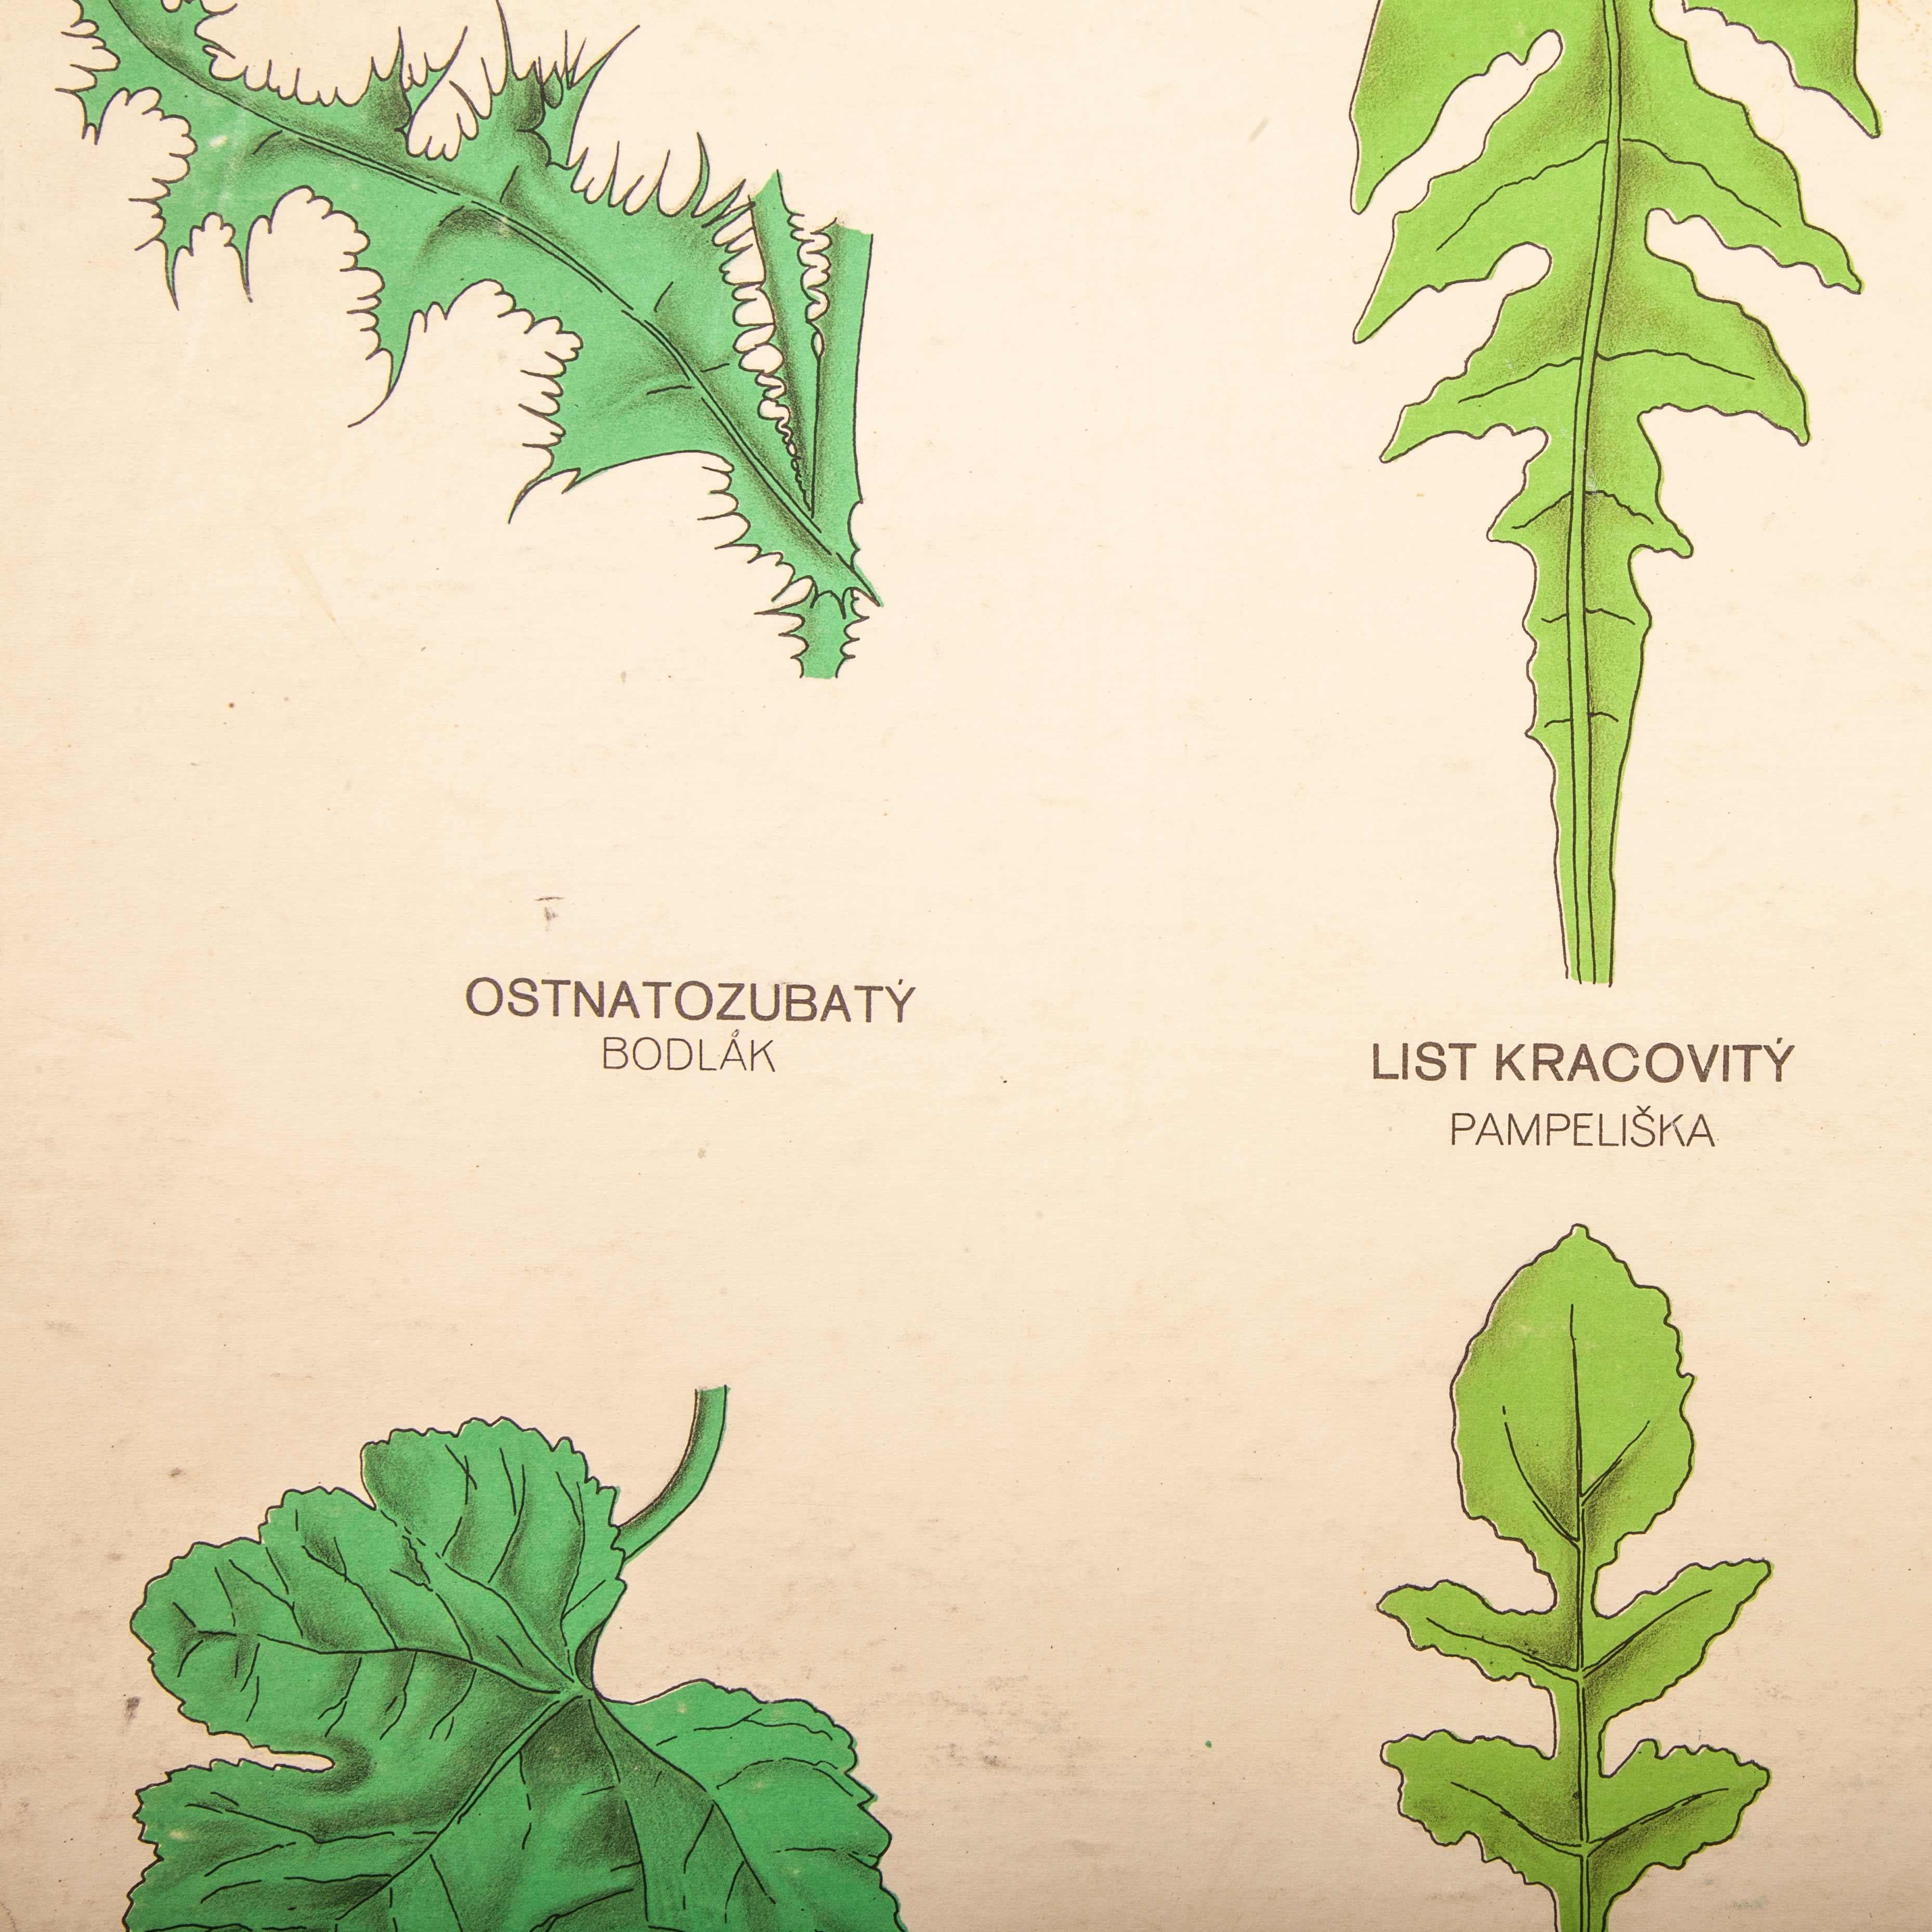 Early 20th century educational chart – rigid chart plant – leaf varieties
Early 20th century educational chart – rigid chart plant – leaf varieties. A rare educational botanical poster from the Czech Republic. See photographs below to see condition